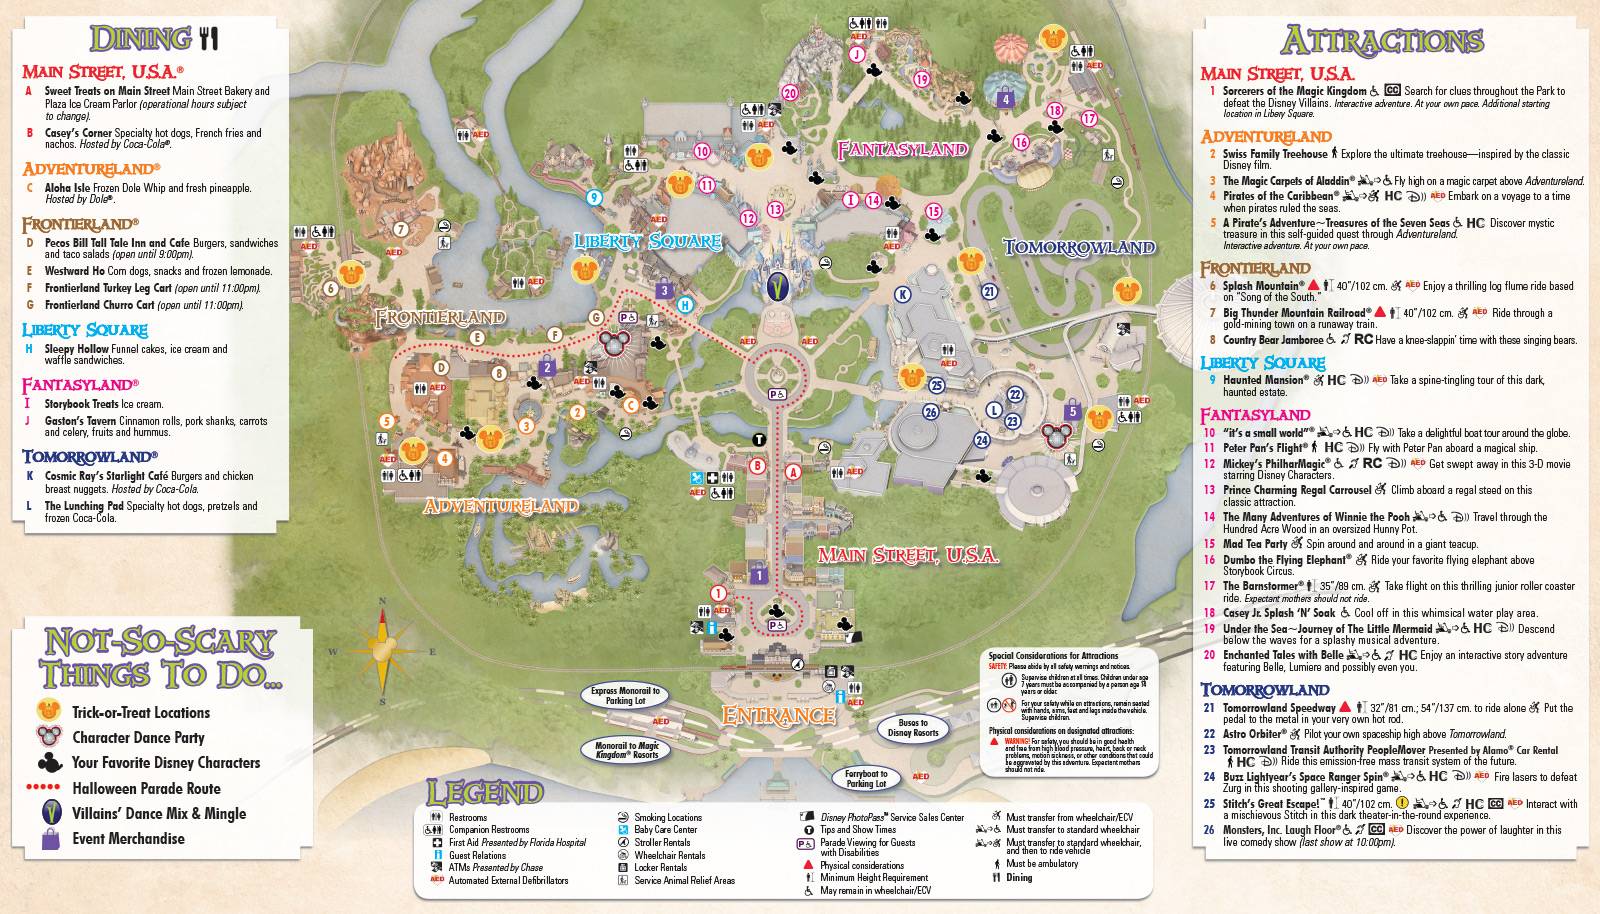 Mickey's Not-So-Scary Halloween Party guide map 2013 - Page 2